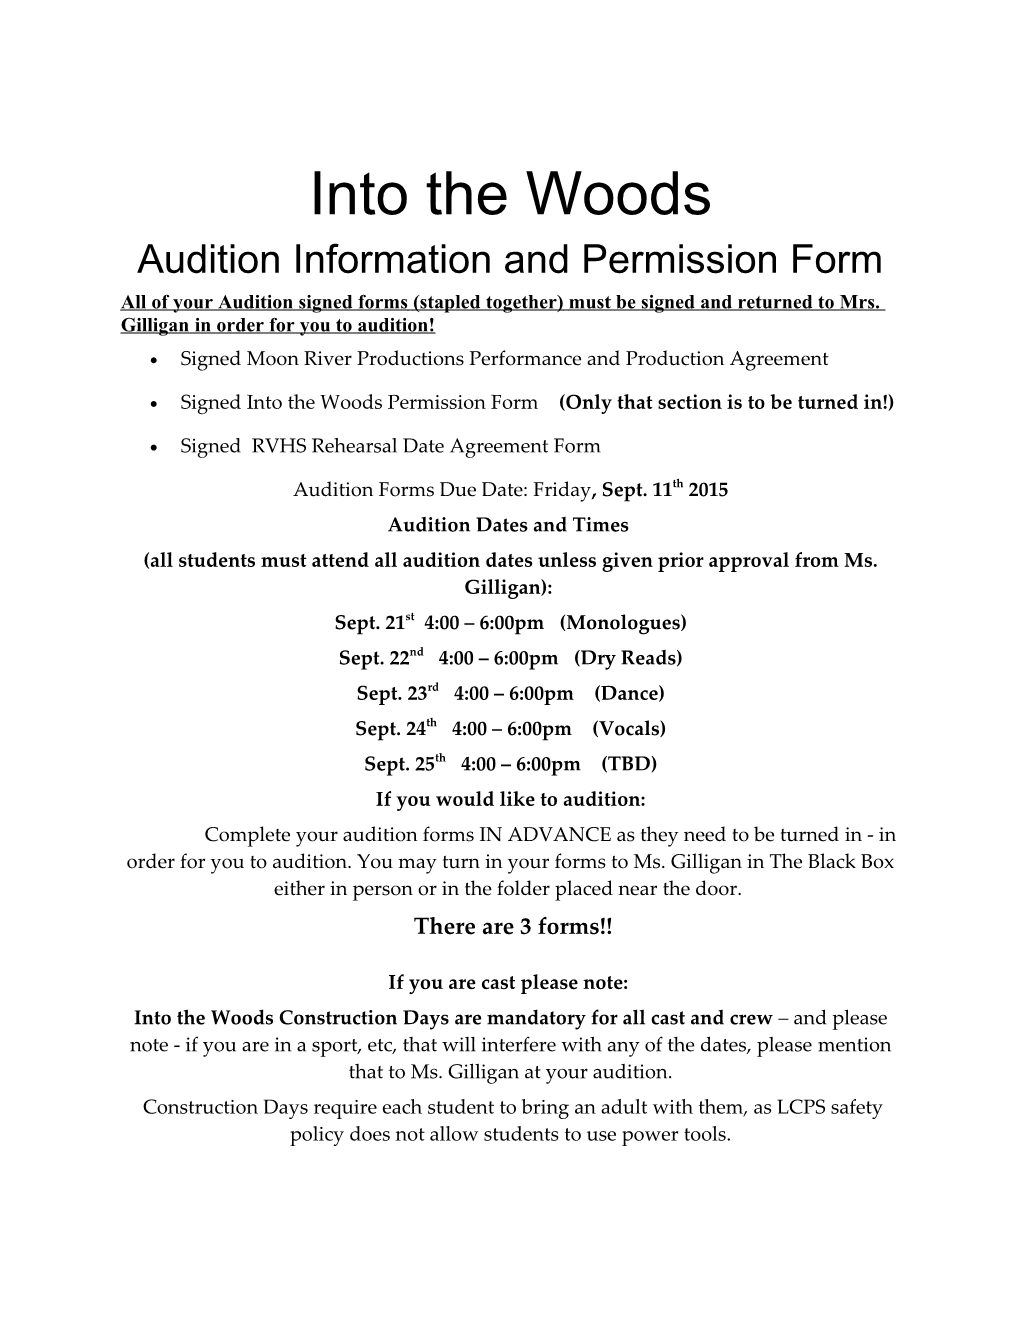 Audition Information and Permission Form